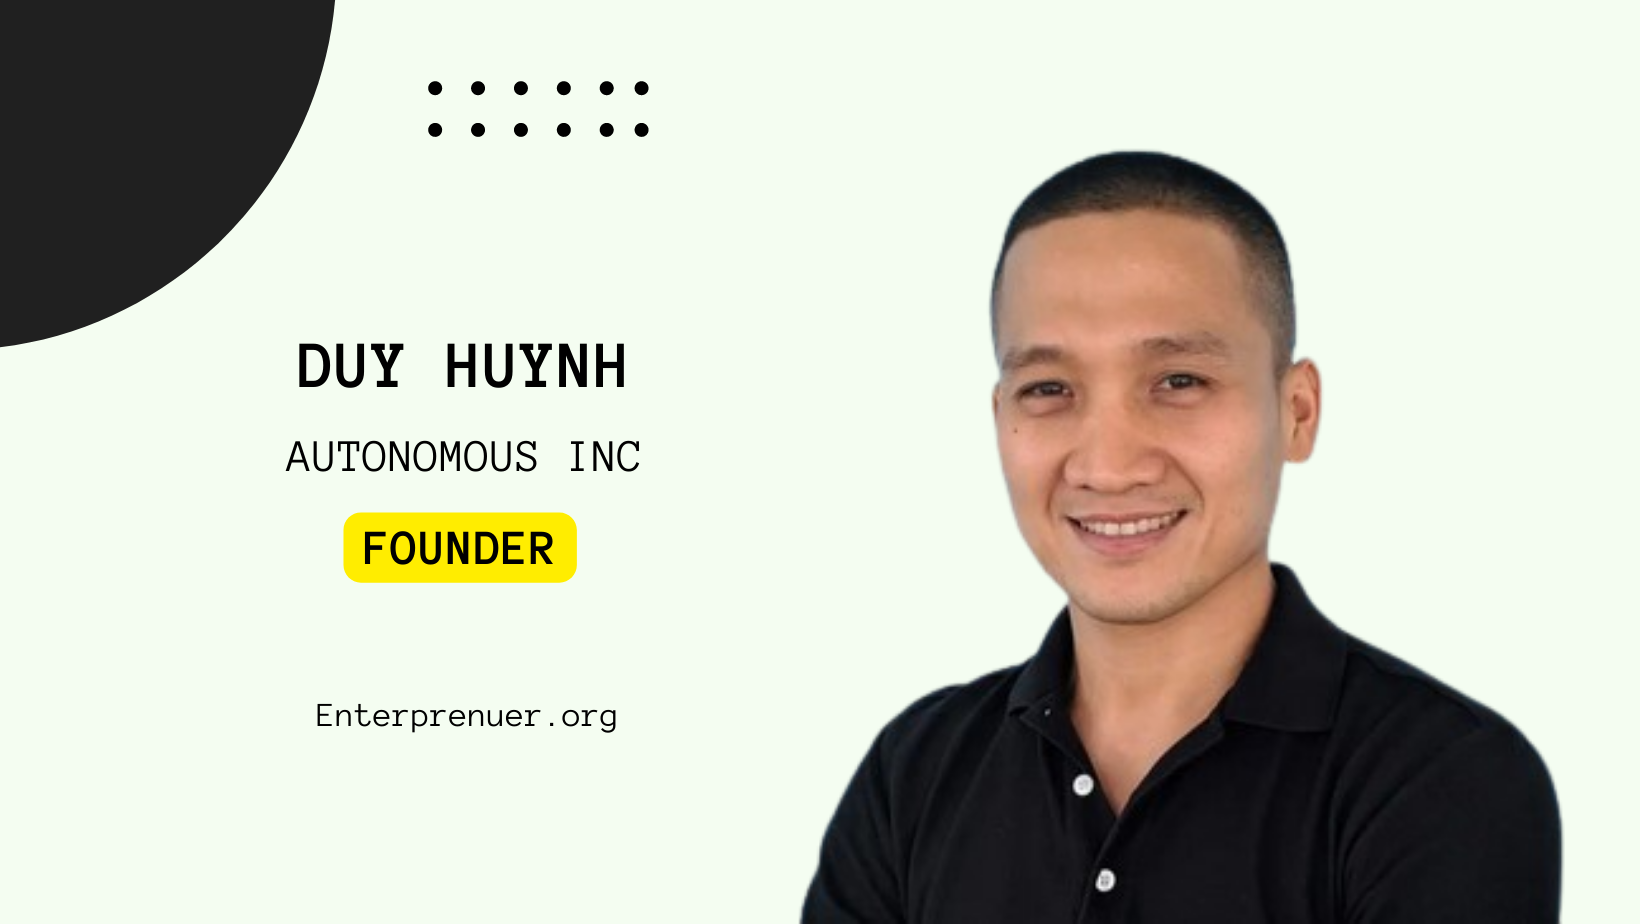 Duy Huynh Founder, and CEO of Autonomous Inc